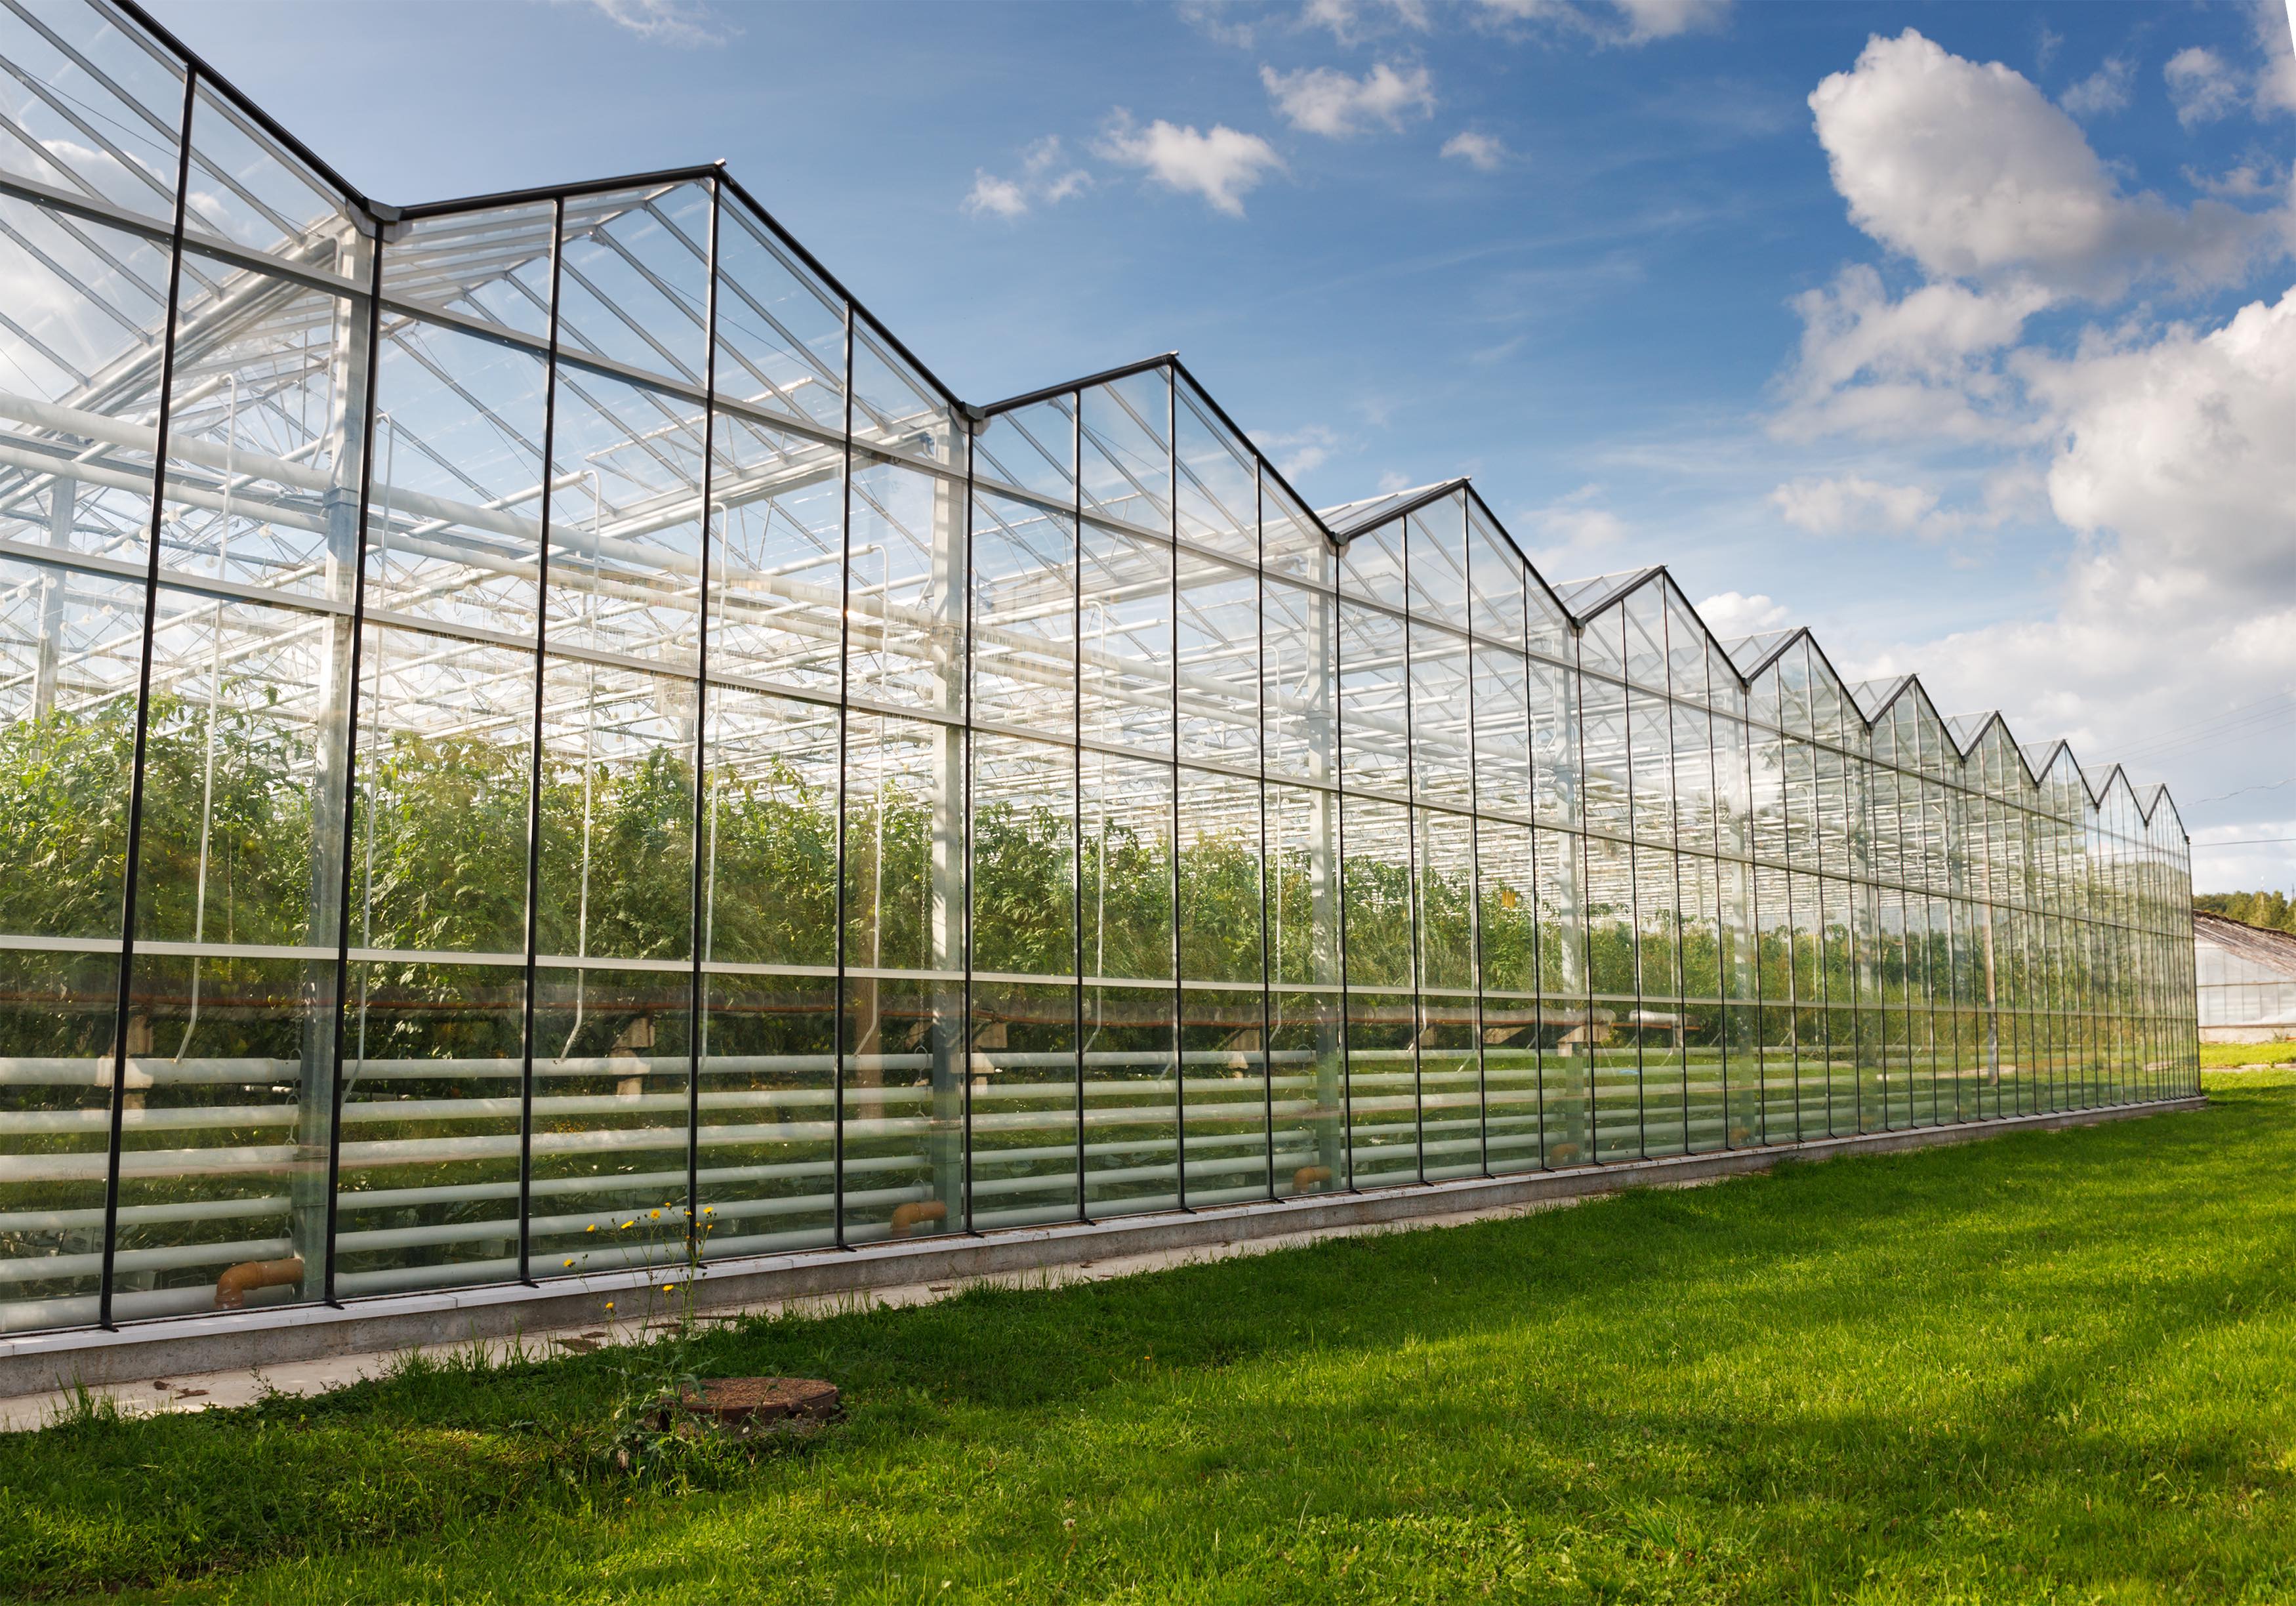 Greenhouse complexes